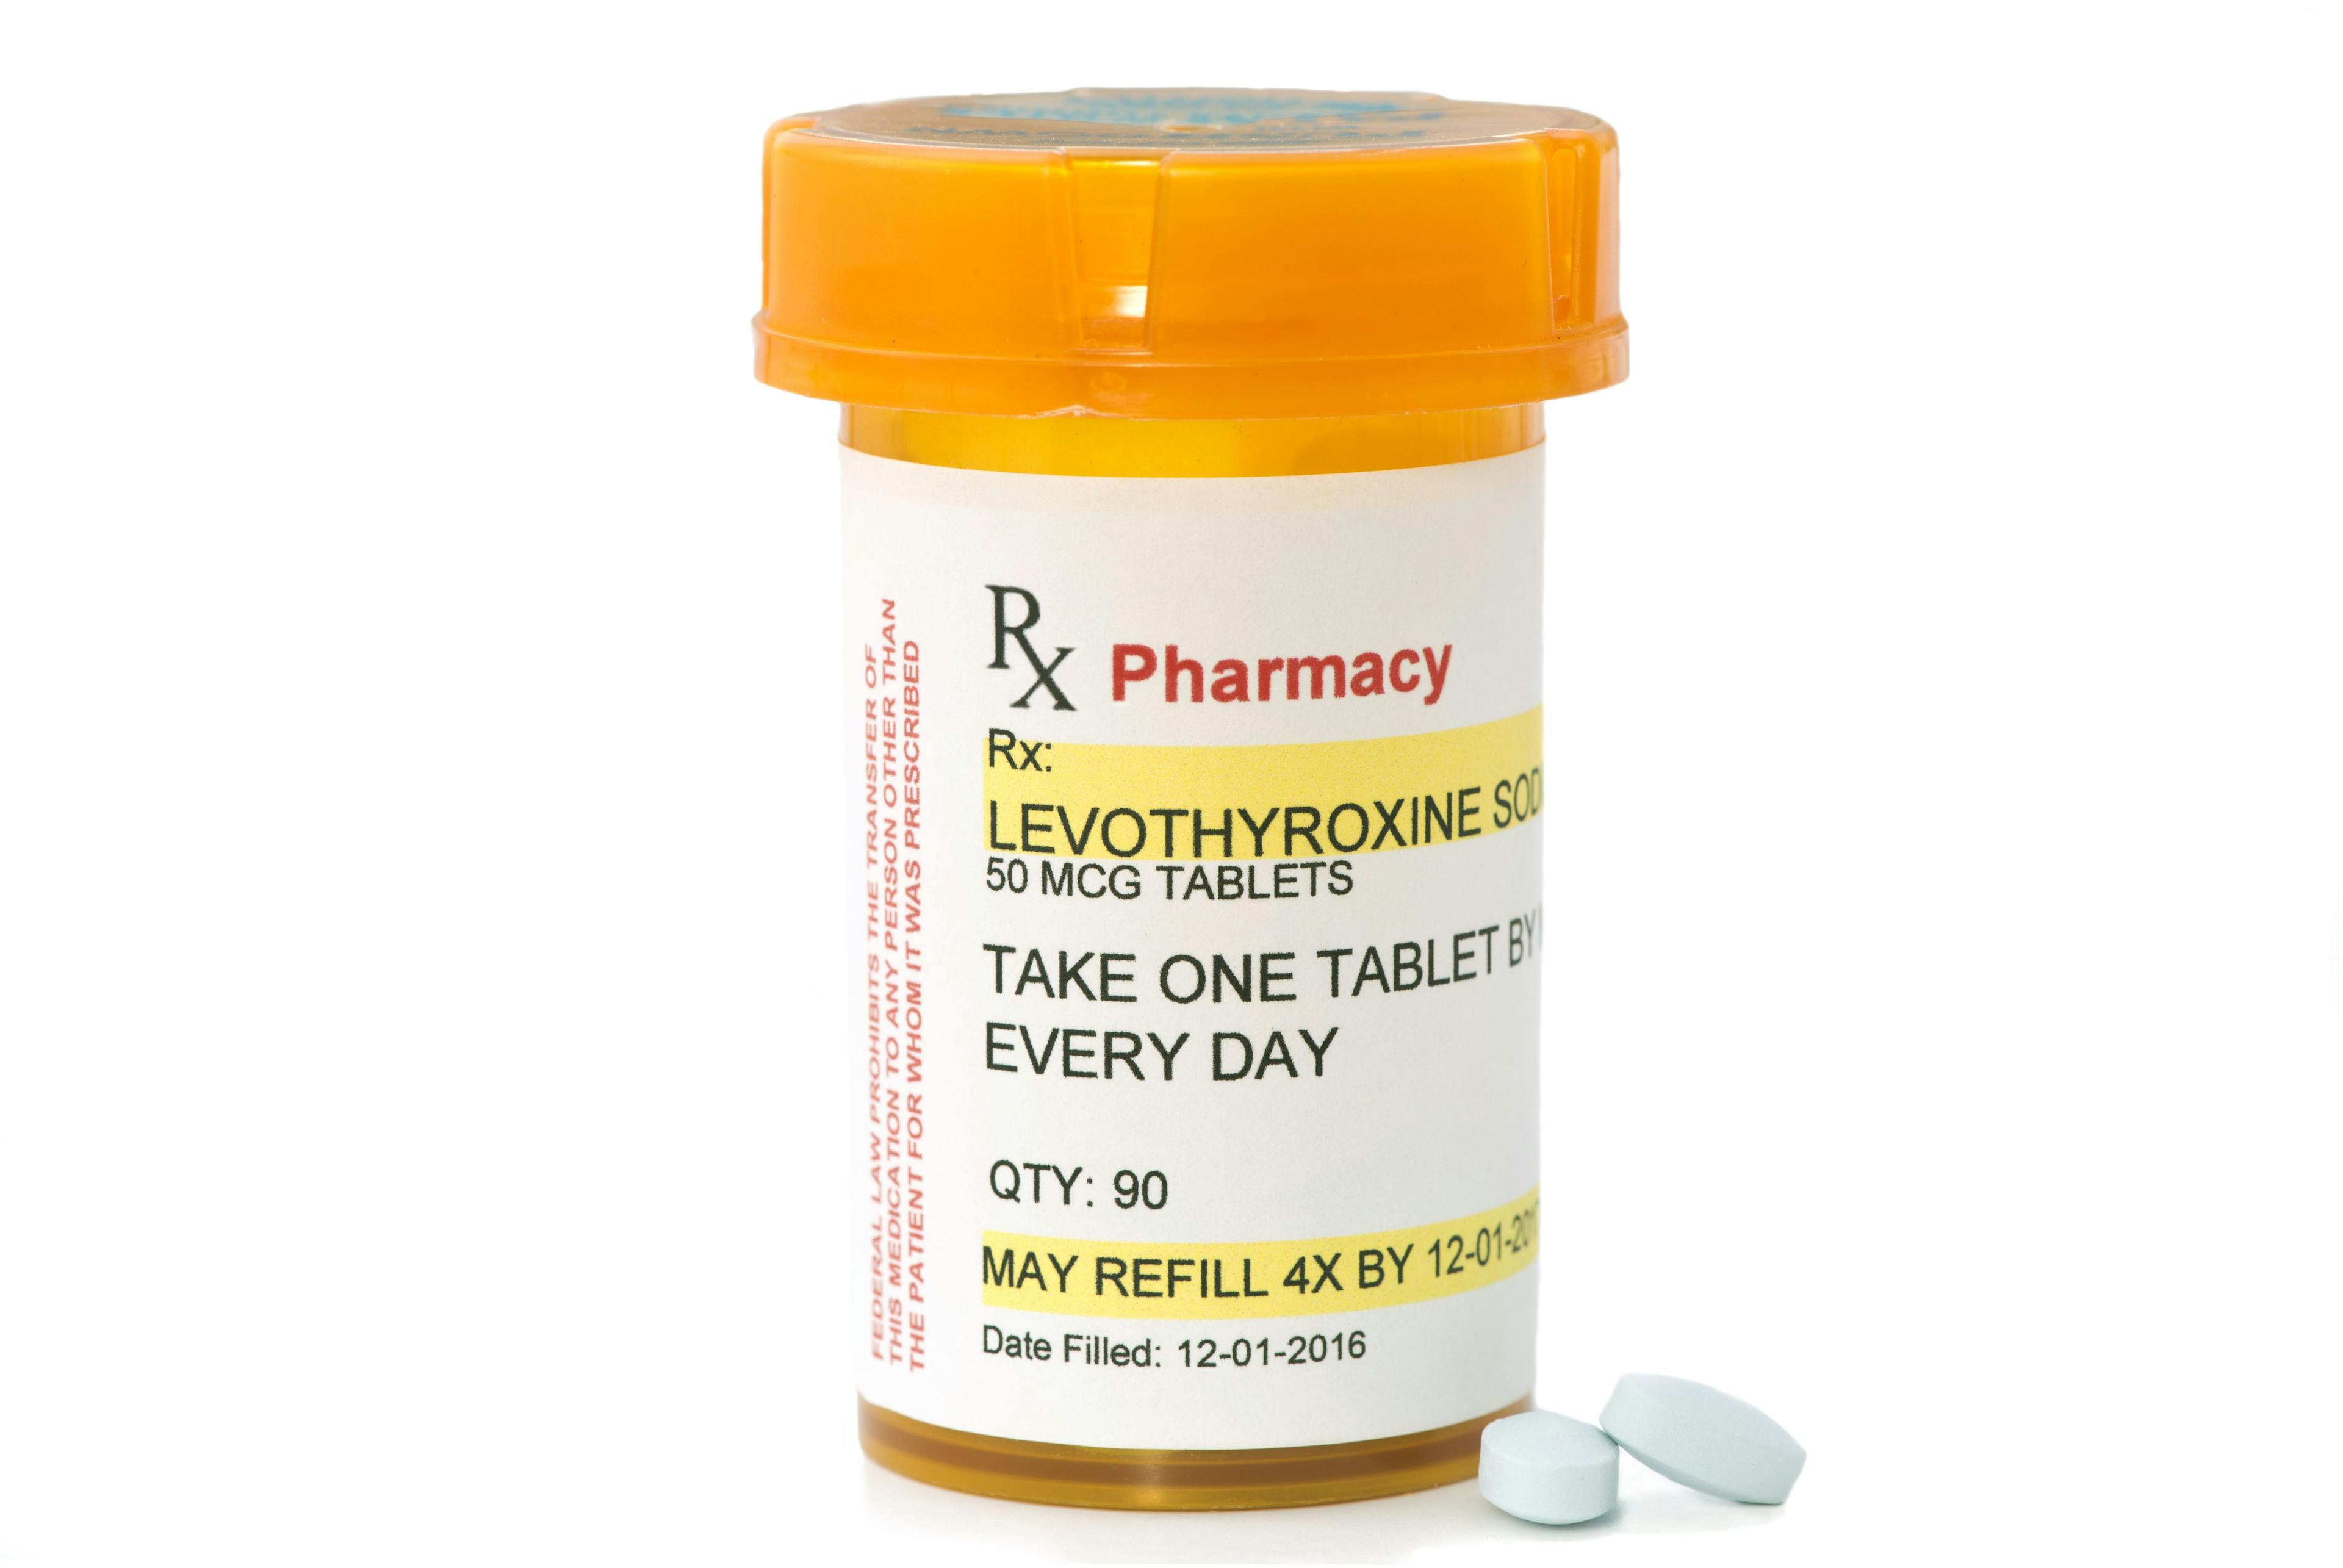 Does levothyroxine increase live births in women with thyroid peroxidase antibodies?